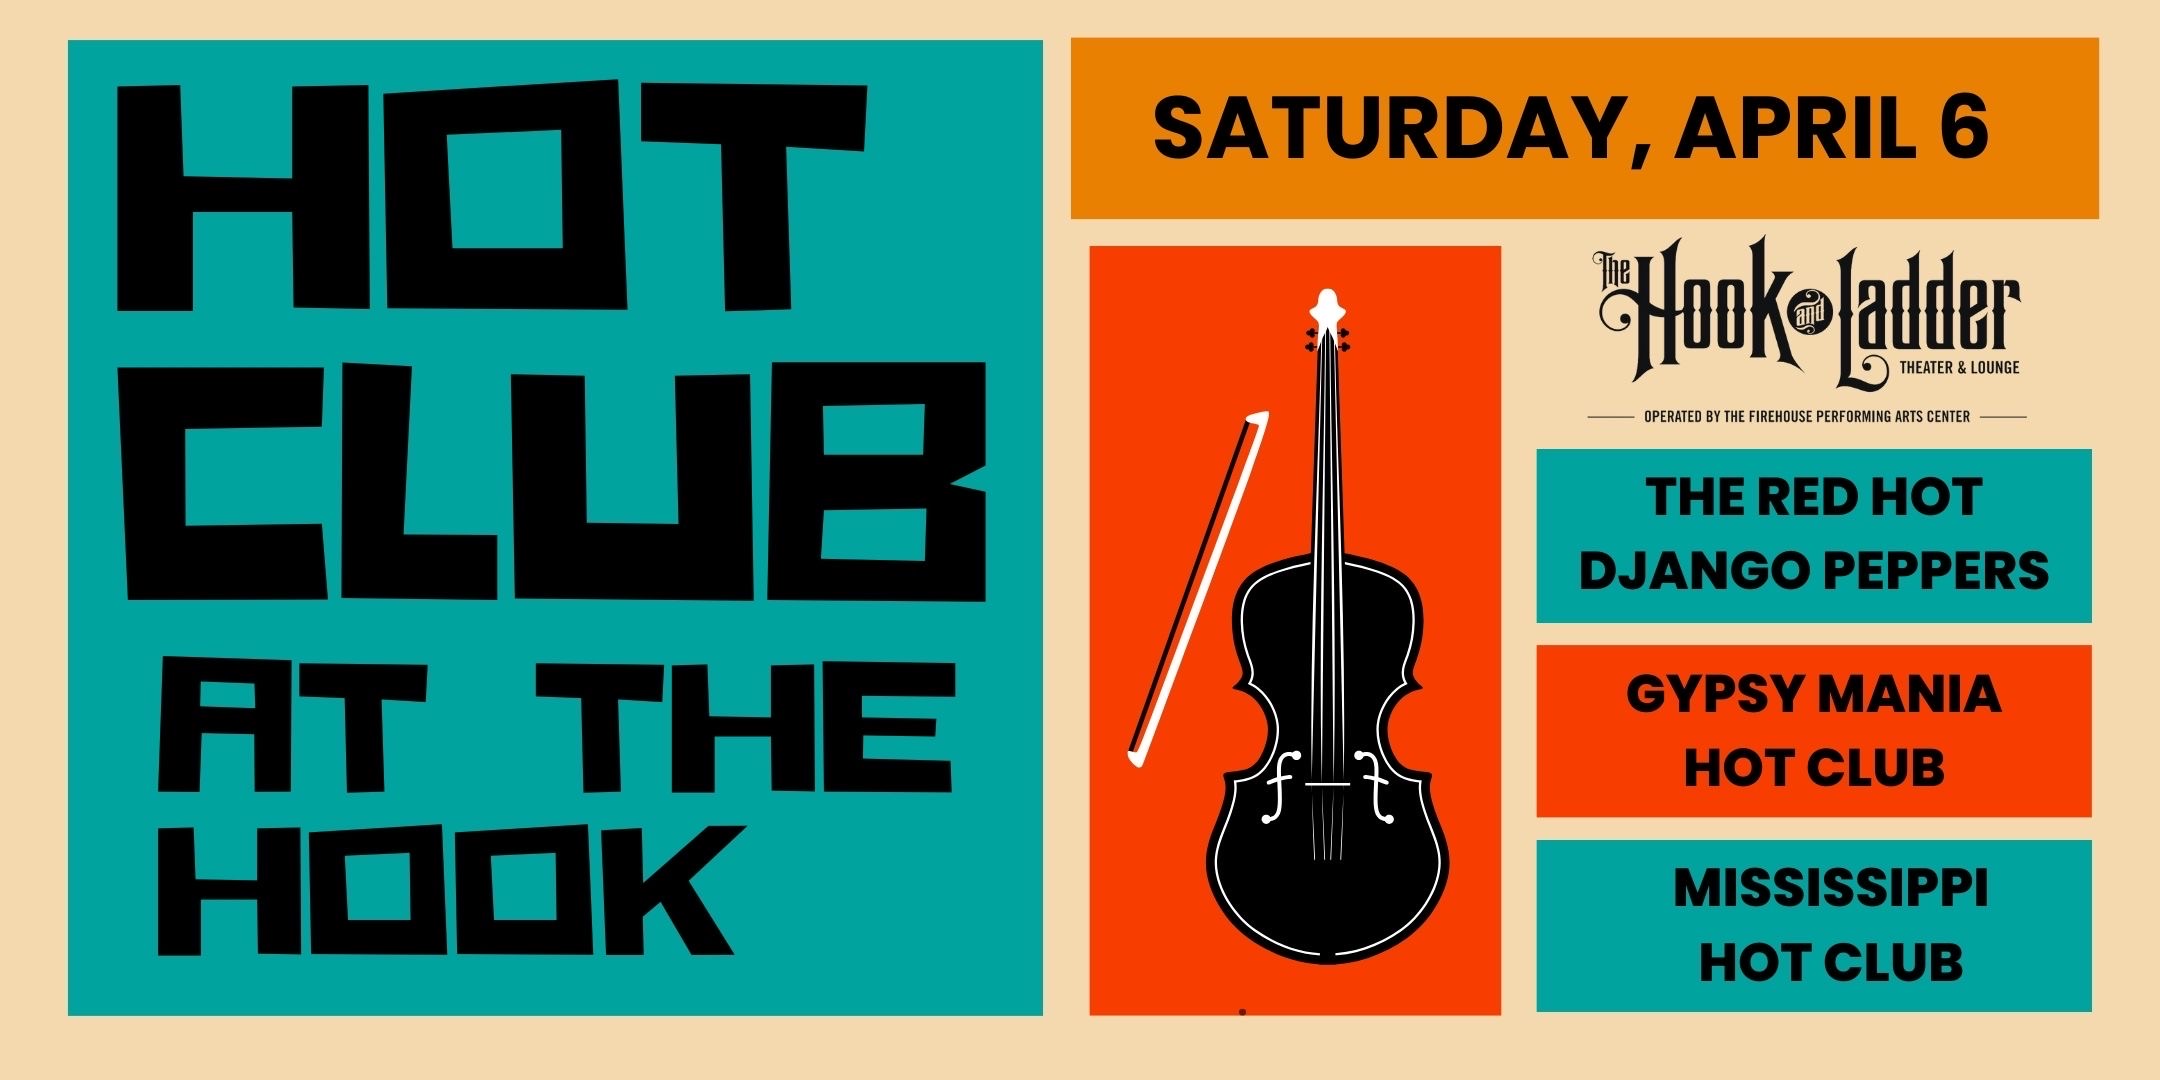 'Hot Club at The Hook' with Red Hot Django Peppers, Mississippi Hot Club, and Gypsy Mania Saturday, April 6 The Hook and Ladder Theater Doors 7:00pm :: Music 8:00pm Reserved Seating: $20* Standing Room Only: $15 ADV / $20 DOS NO REFUNDS